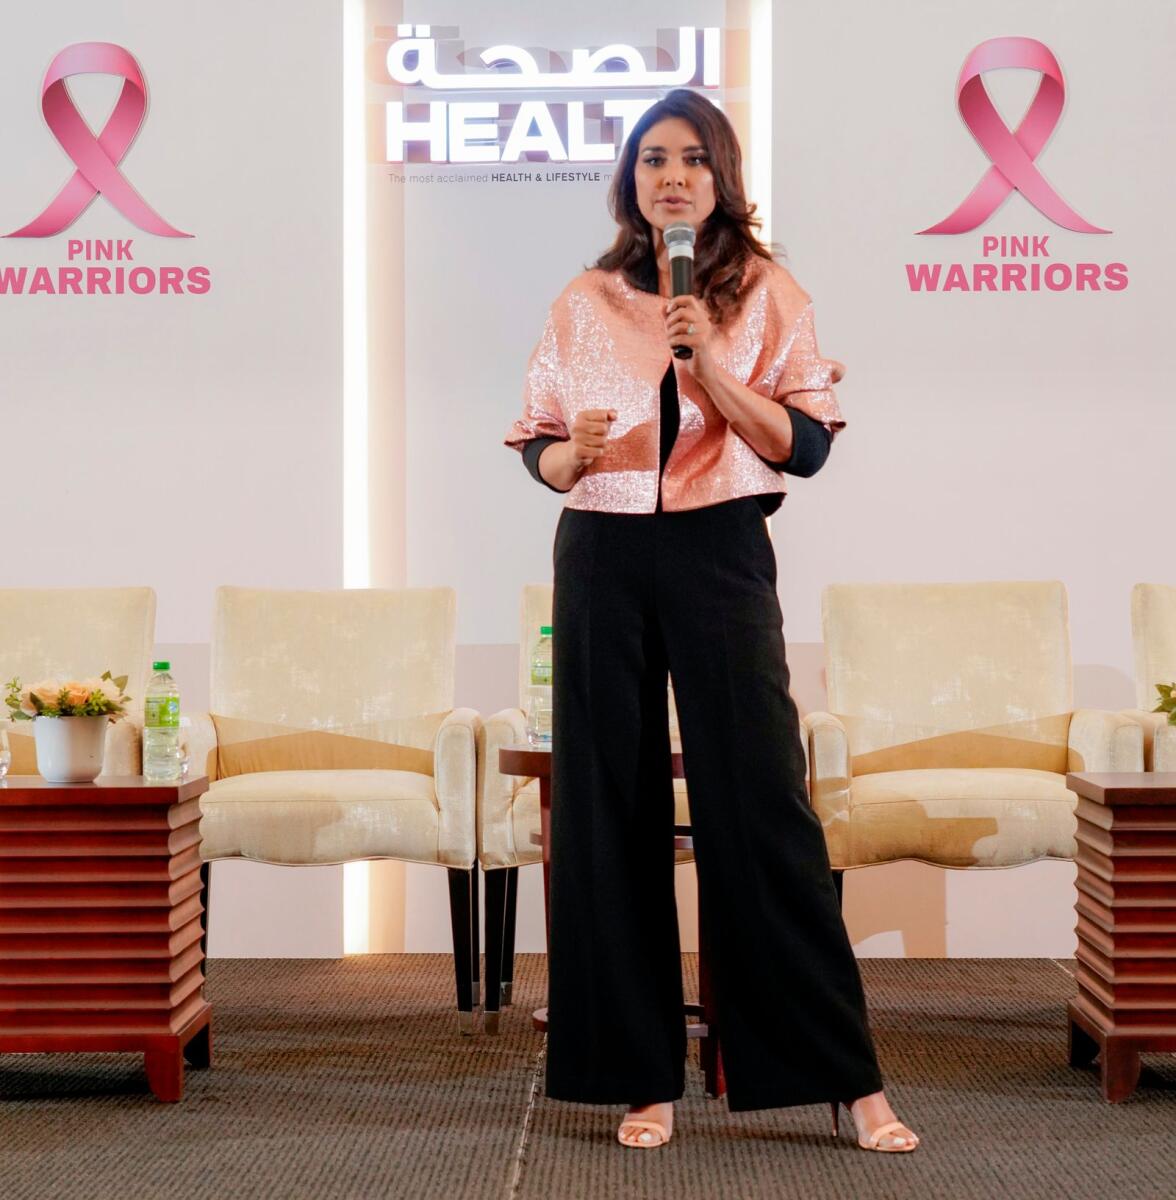 She recently gave a keynote speech at the Pink Warriors event in Dubai